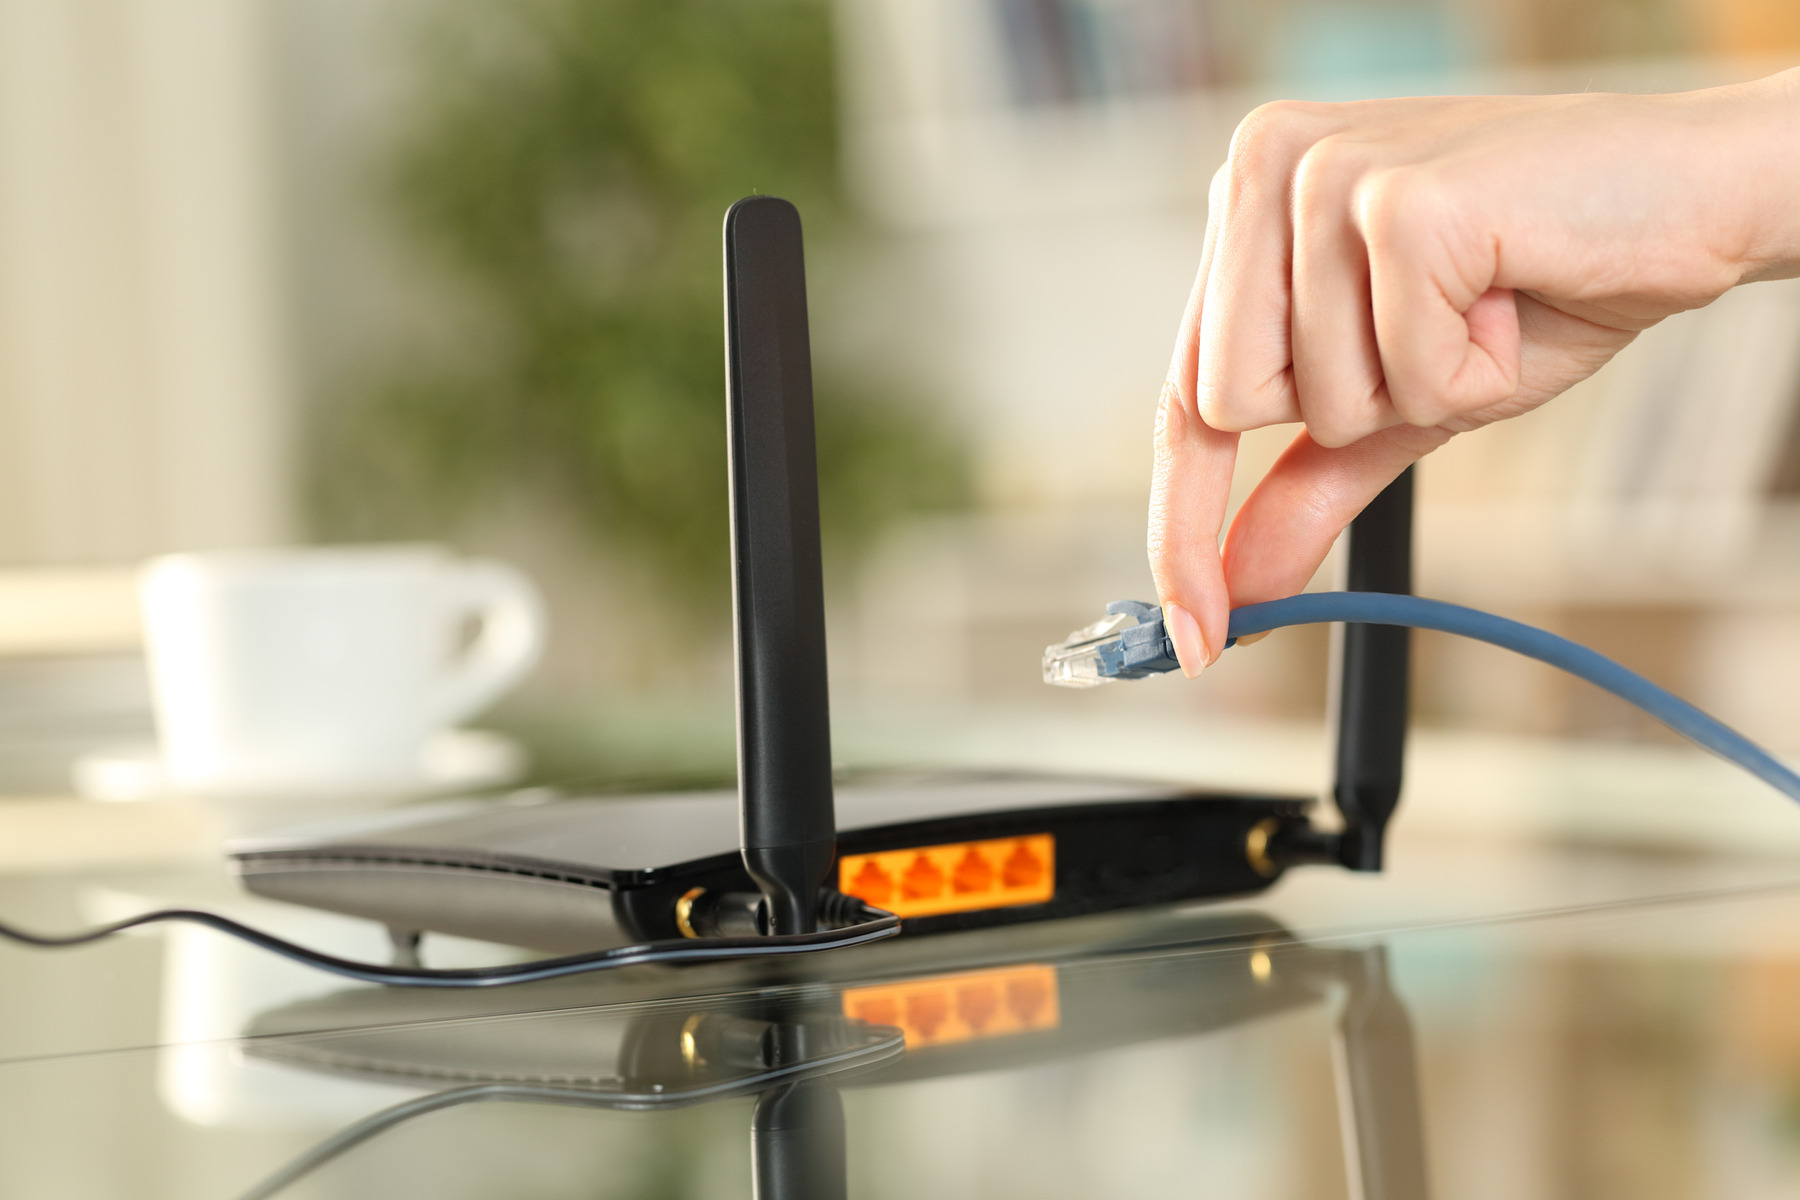 where-to-find-ssid-on-wireless-router